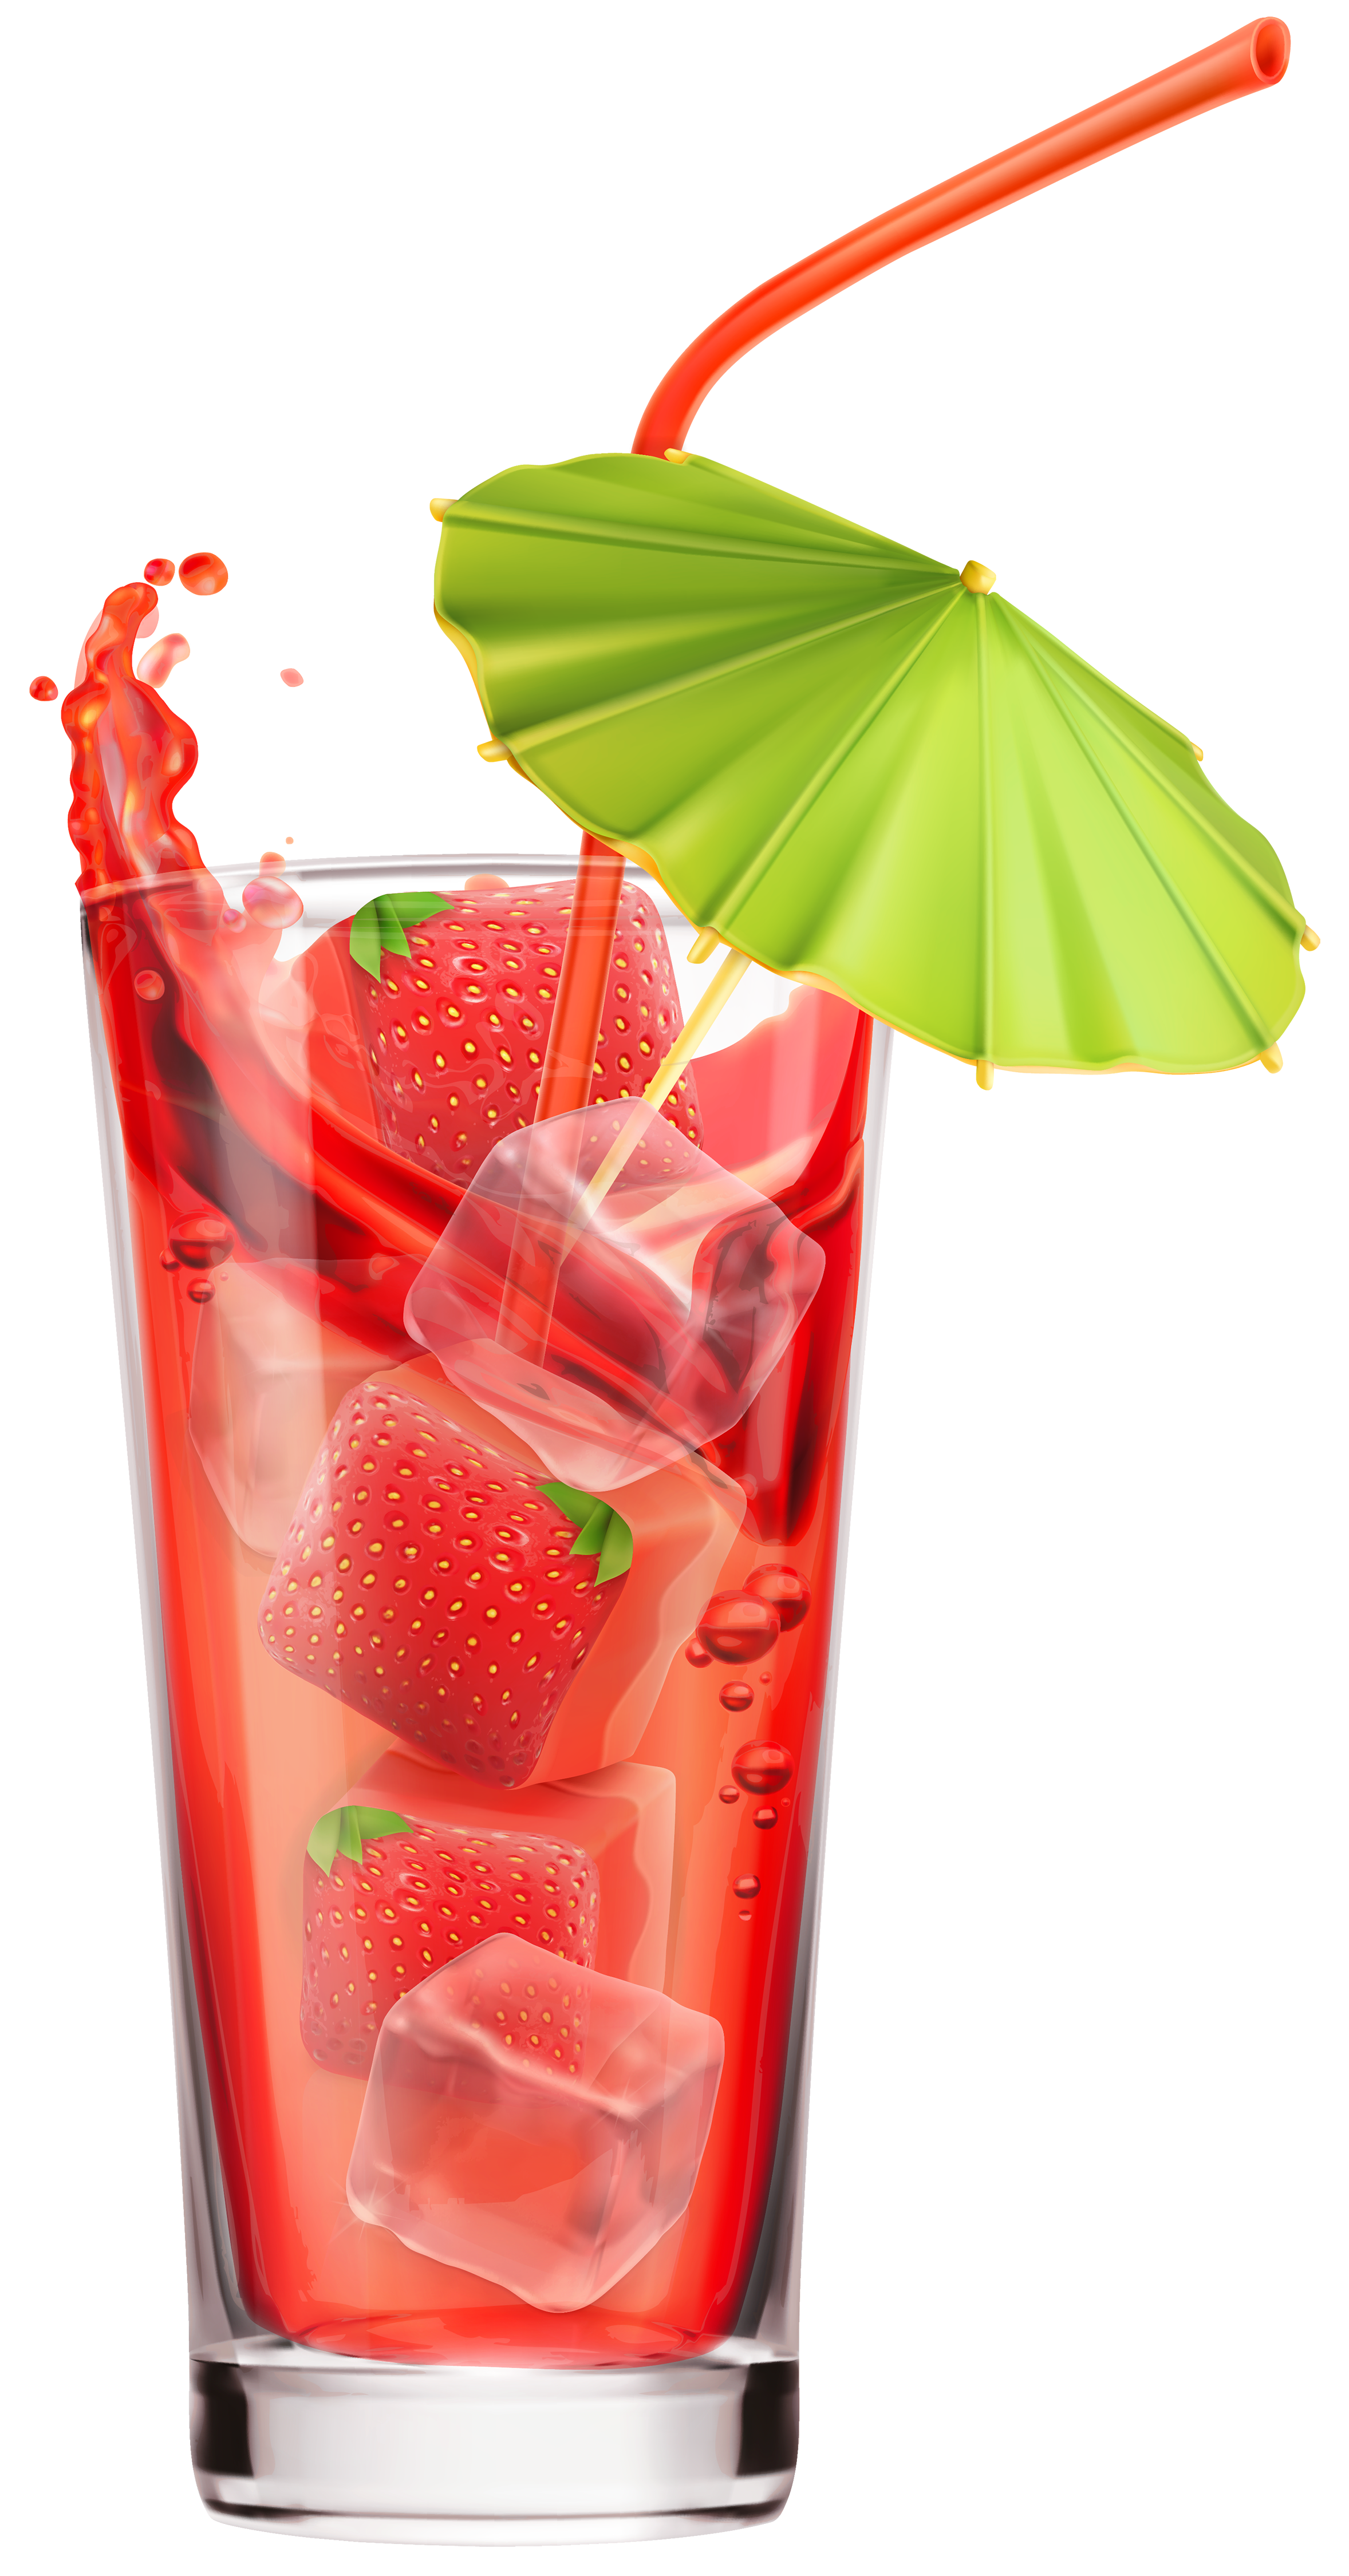 Strawberry cocktail png image. Strawberries clipart stem